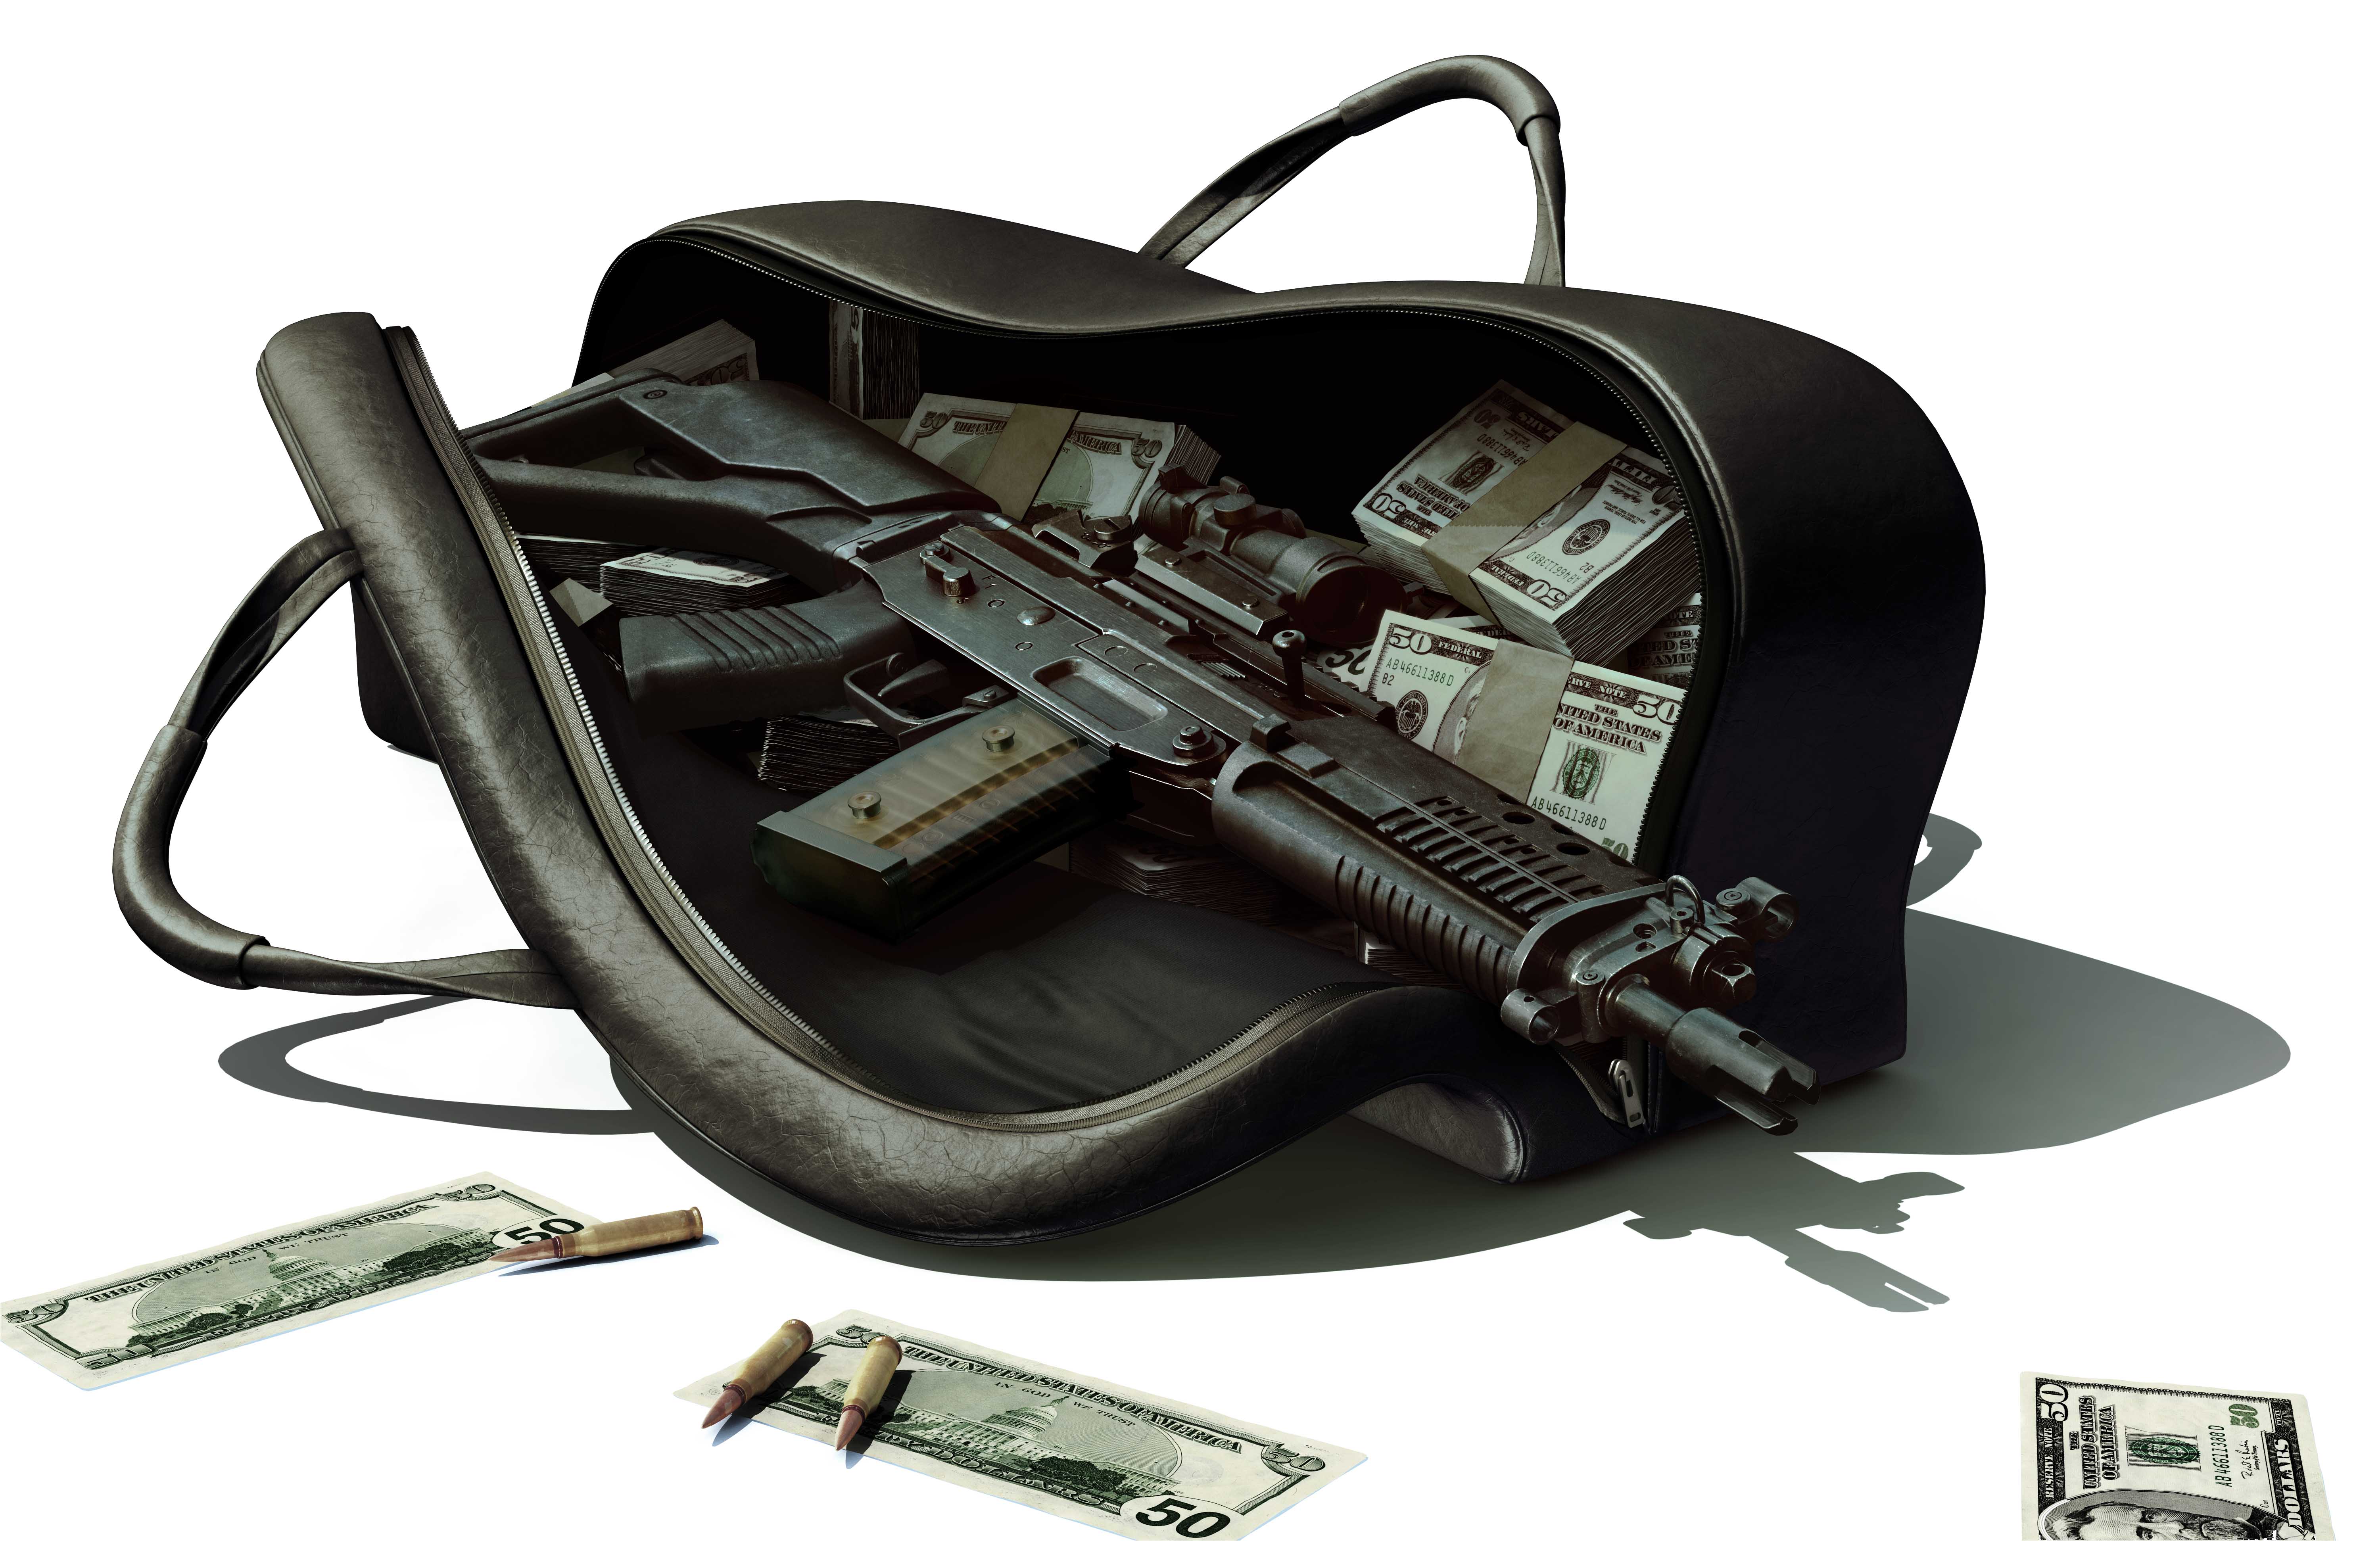 Download A Bag With Money In It Wallpaper